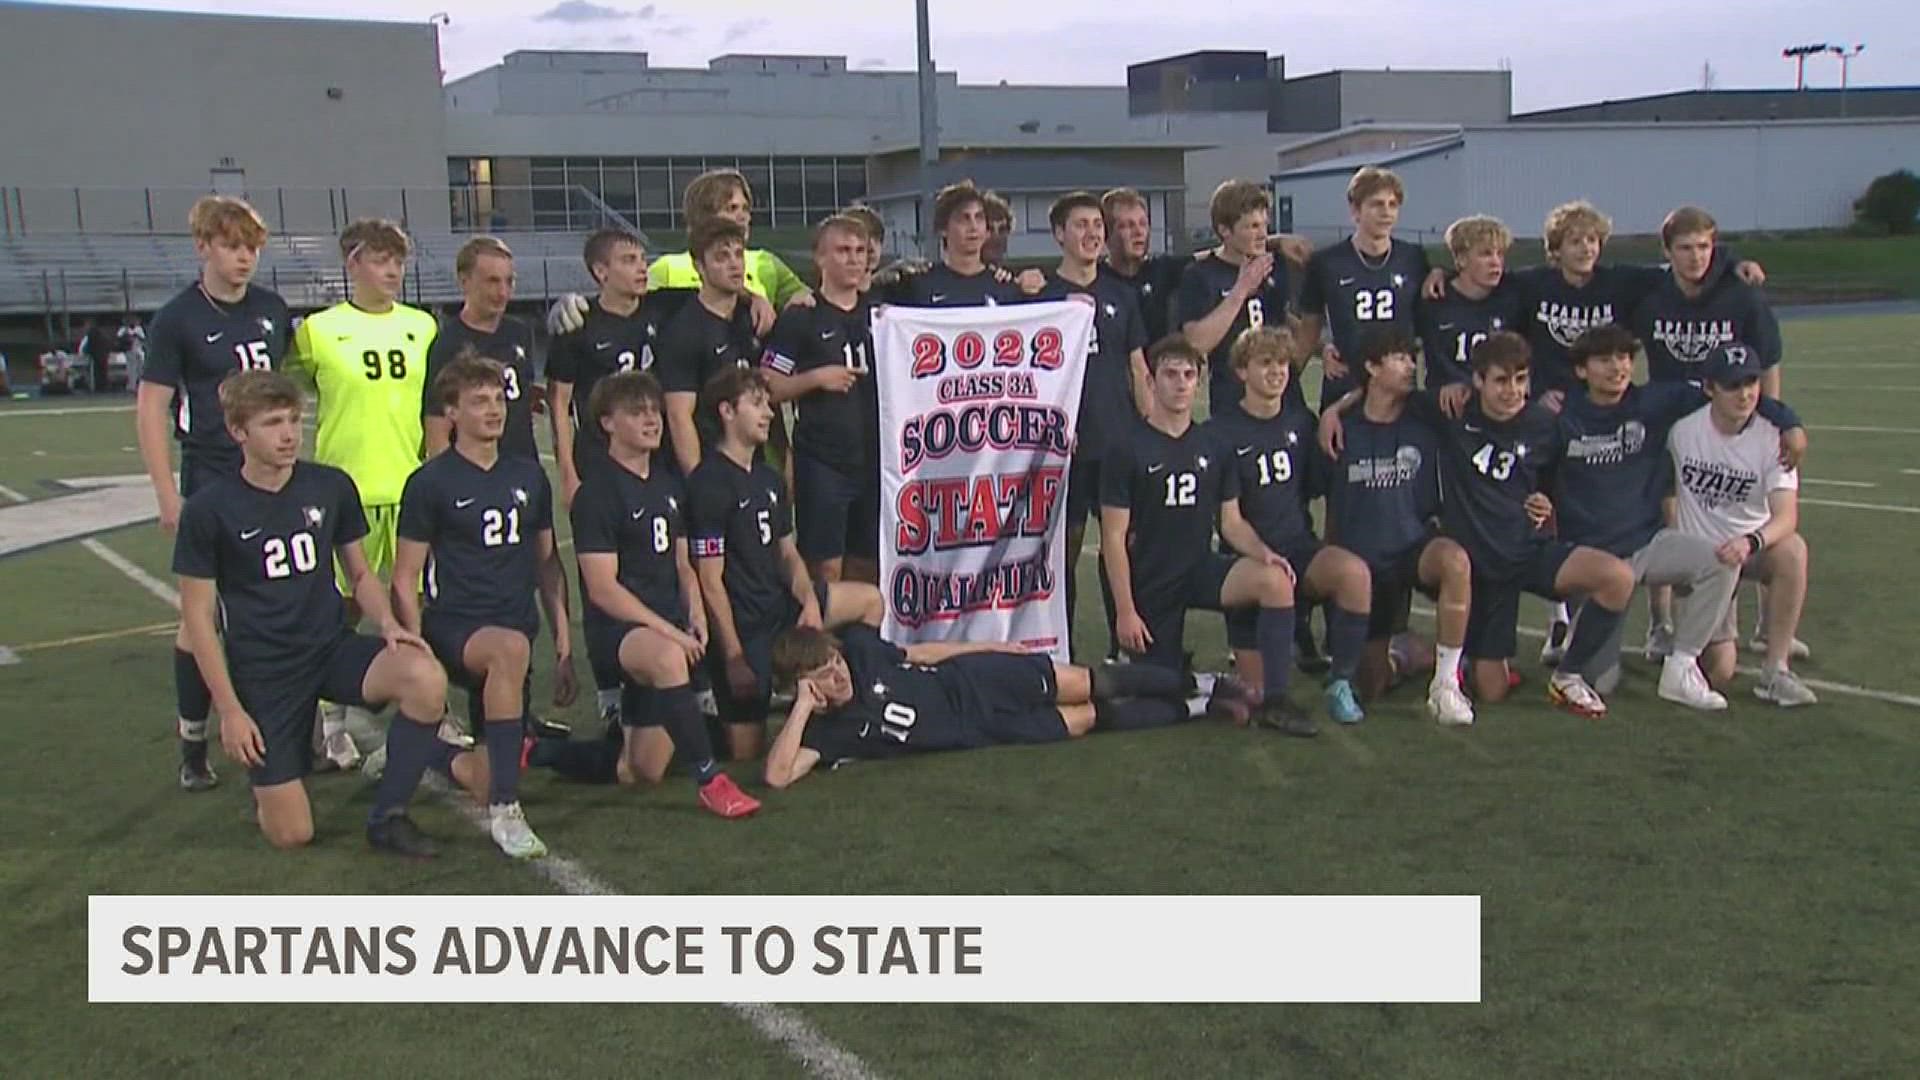 The Spartans advance to State in Des Moines following a 1-0 win over the Bulldogs on Wednesday.